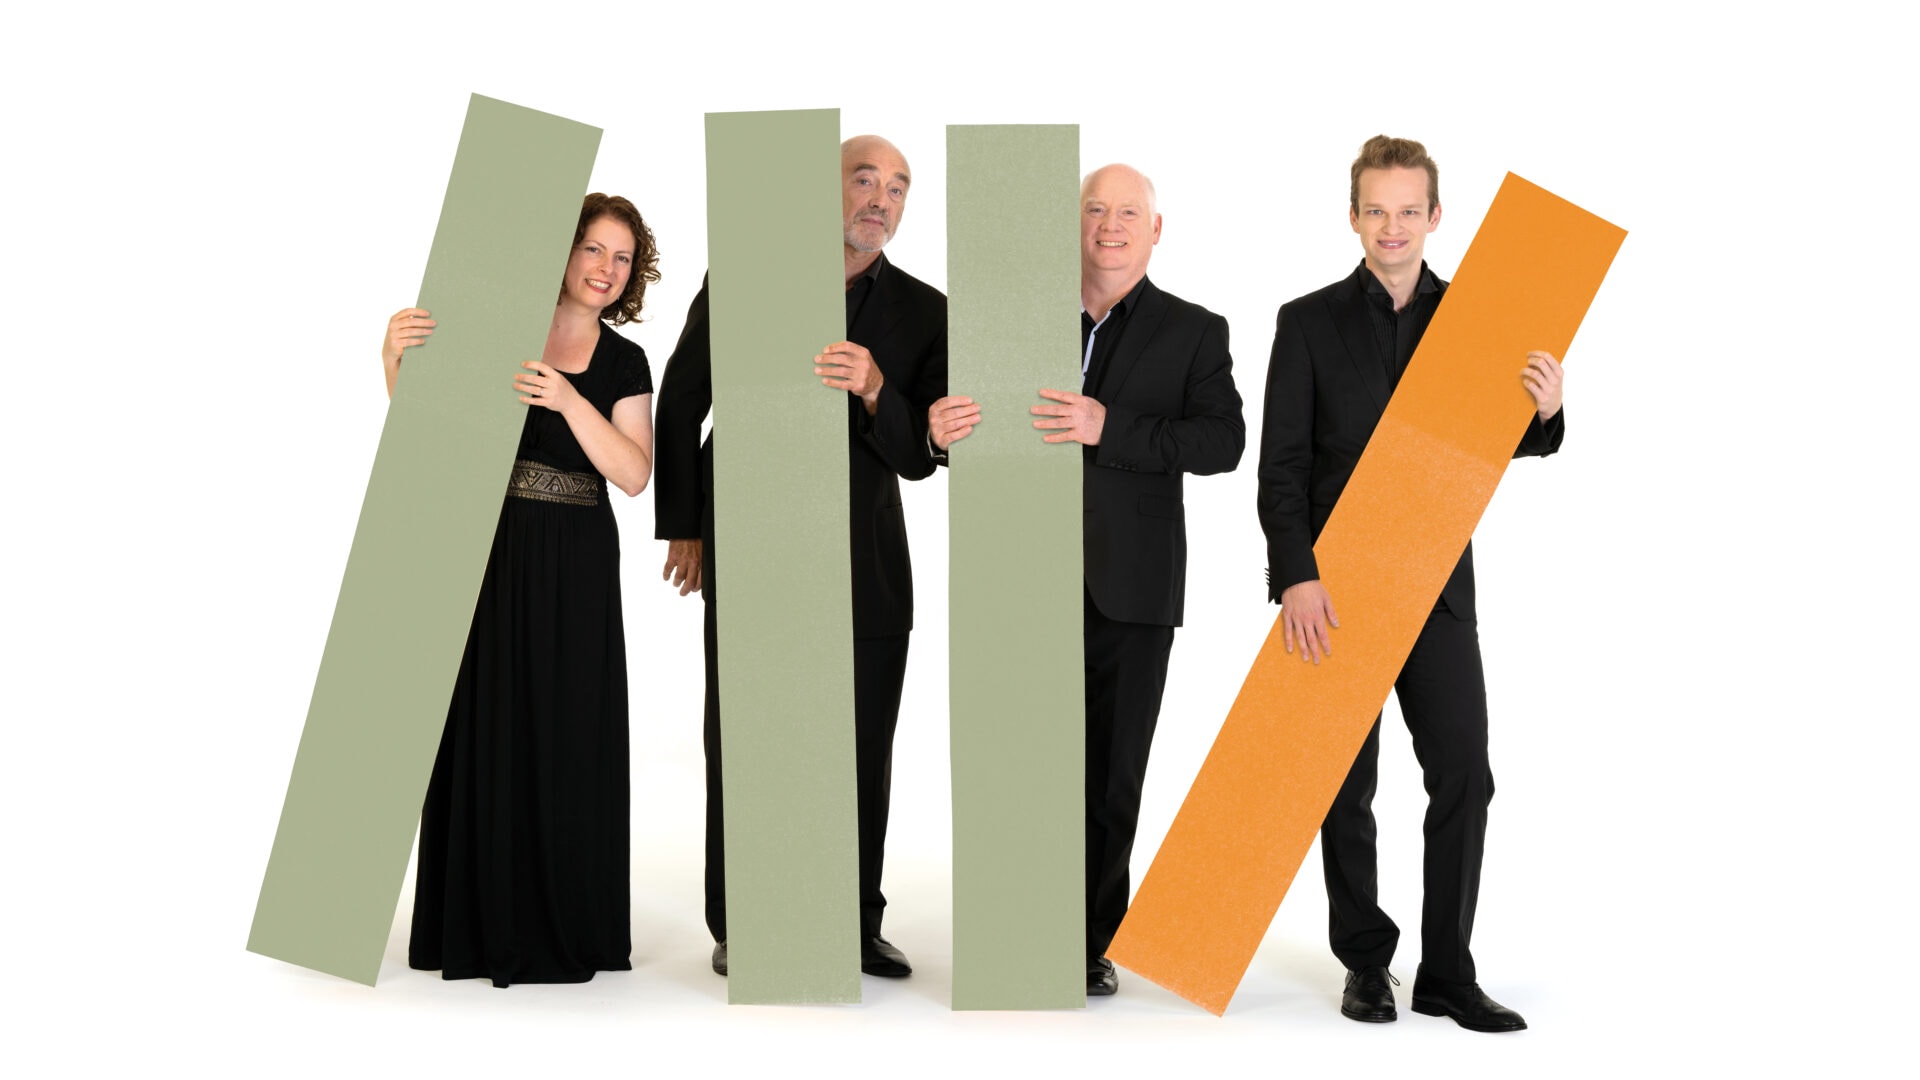 Four BSO musicians standing behind green and orange rectangles